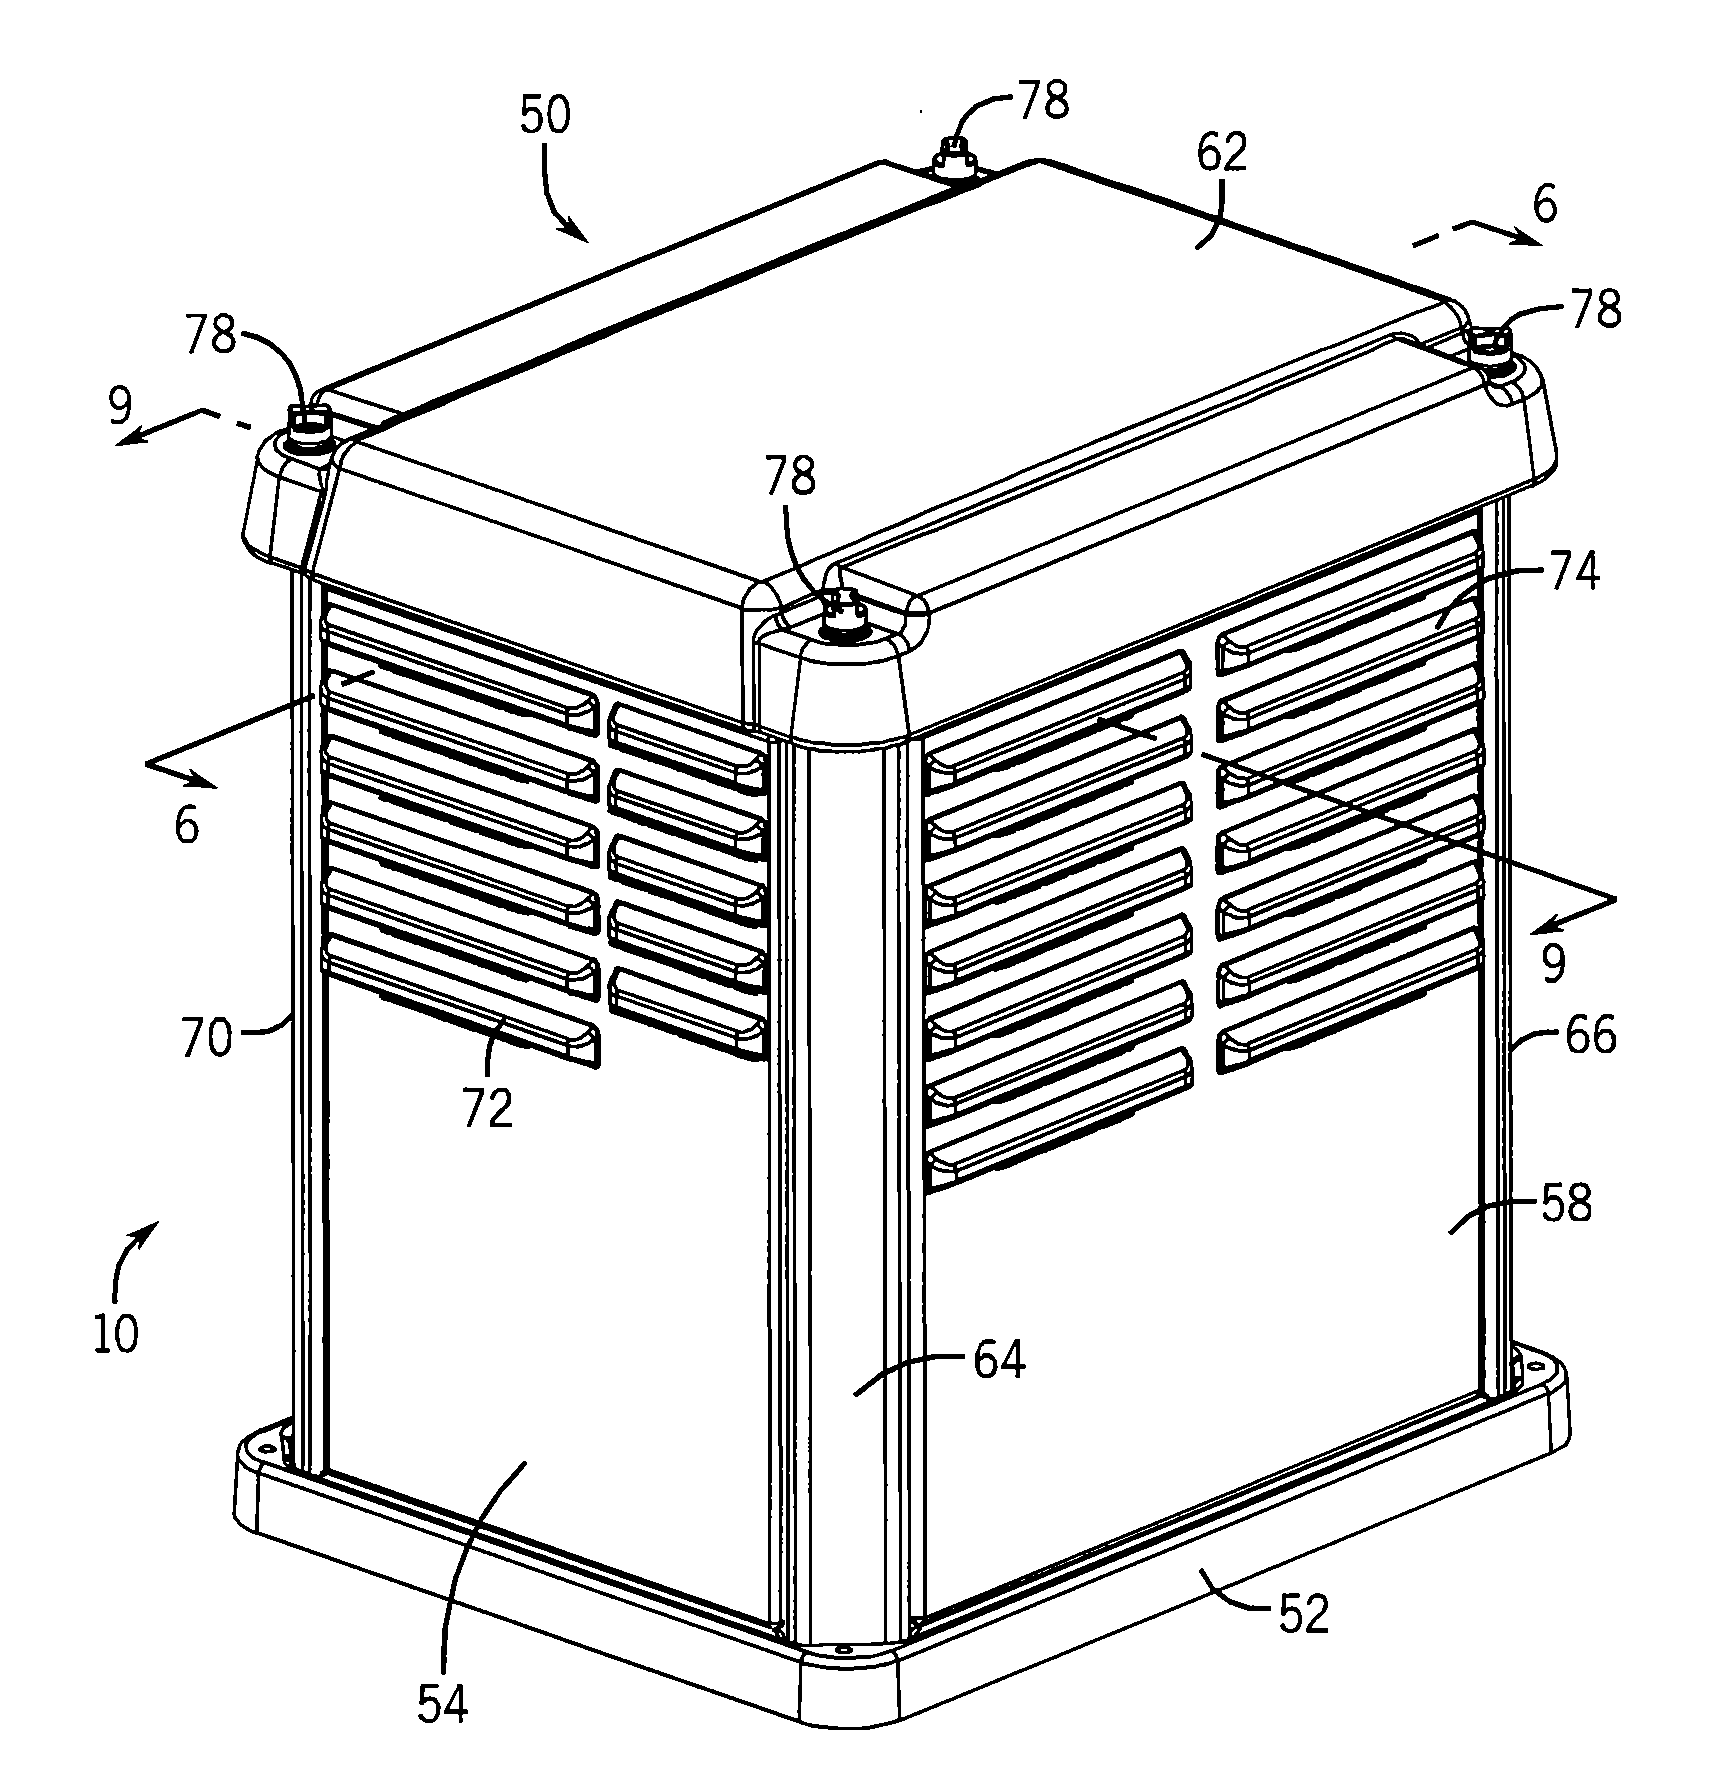 Electrical Generator With Improved Cooling And Exhaust Flows